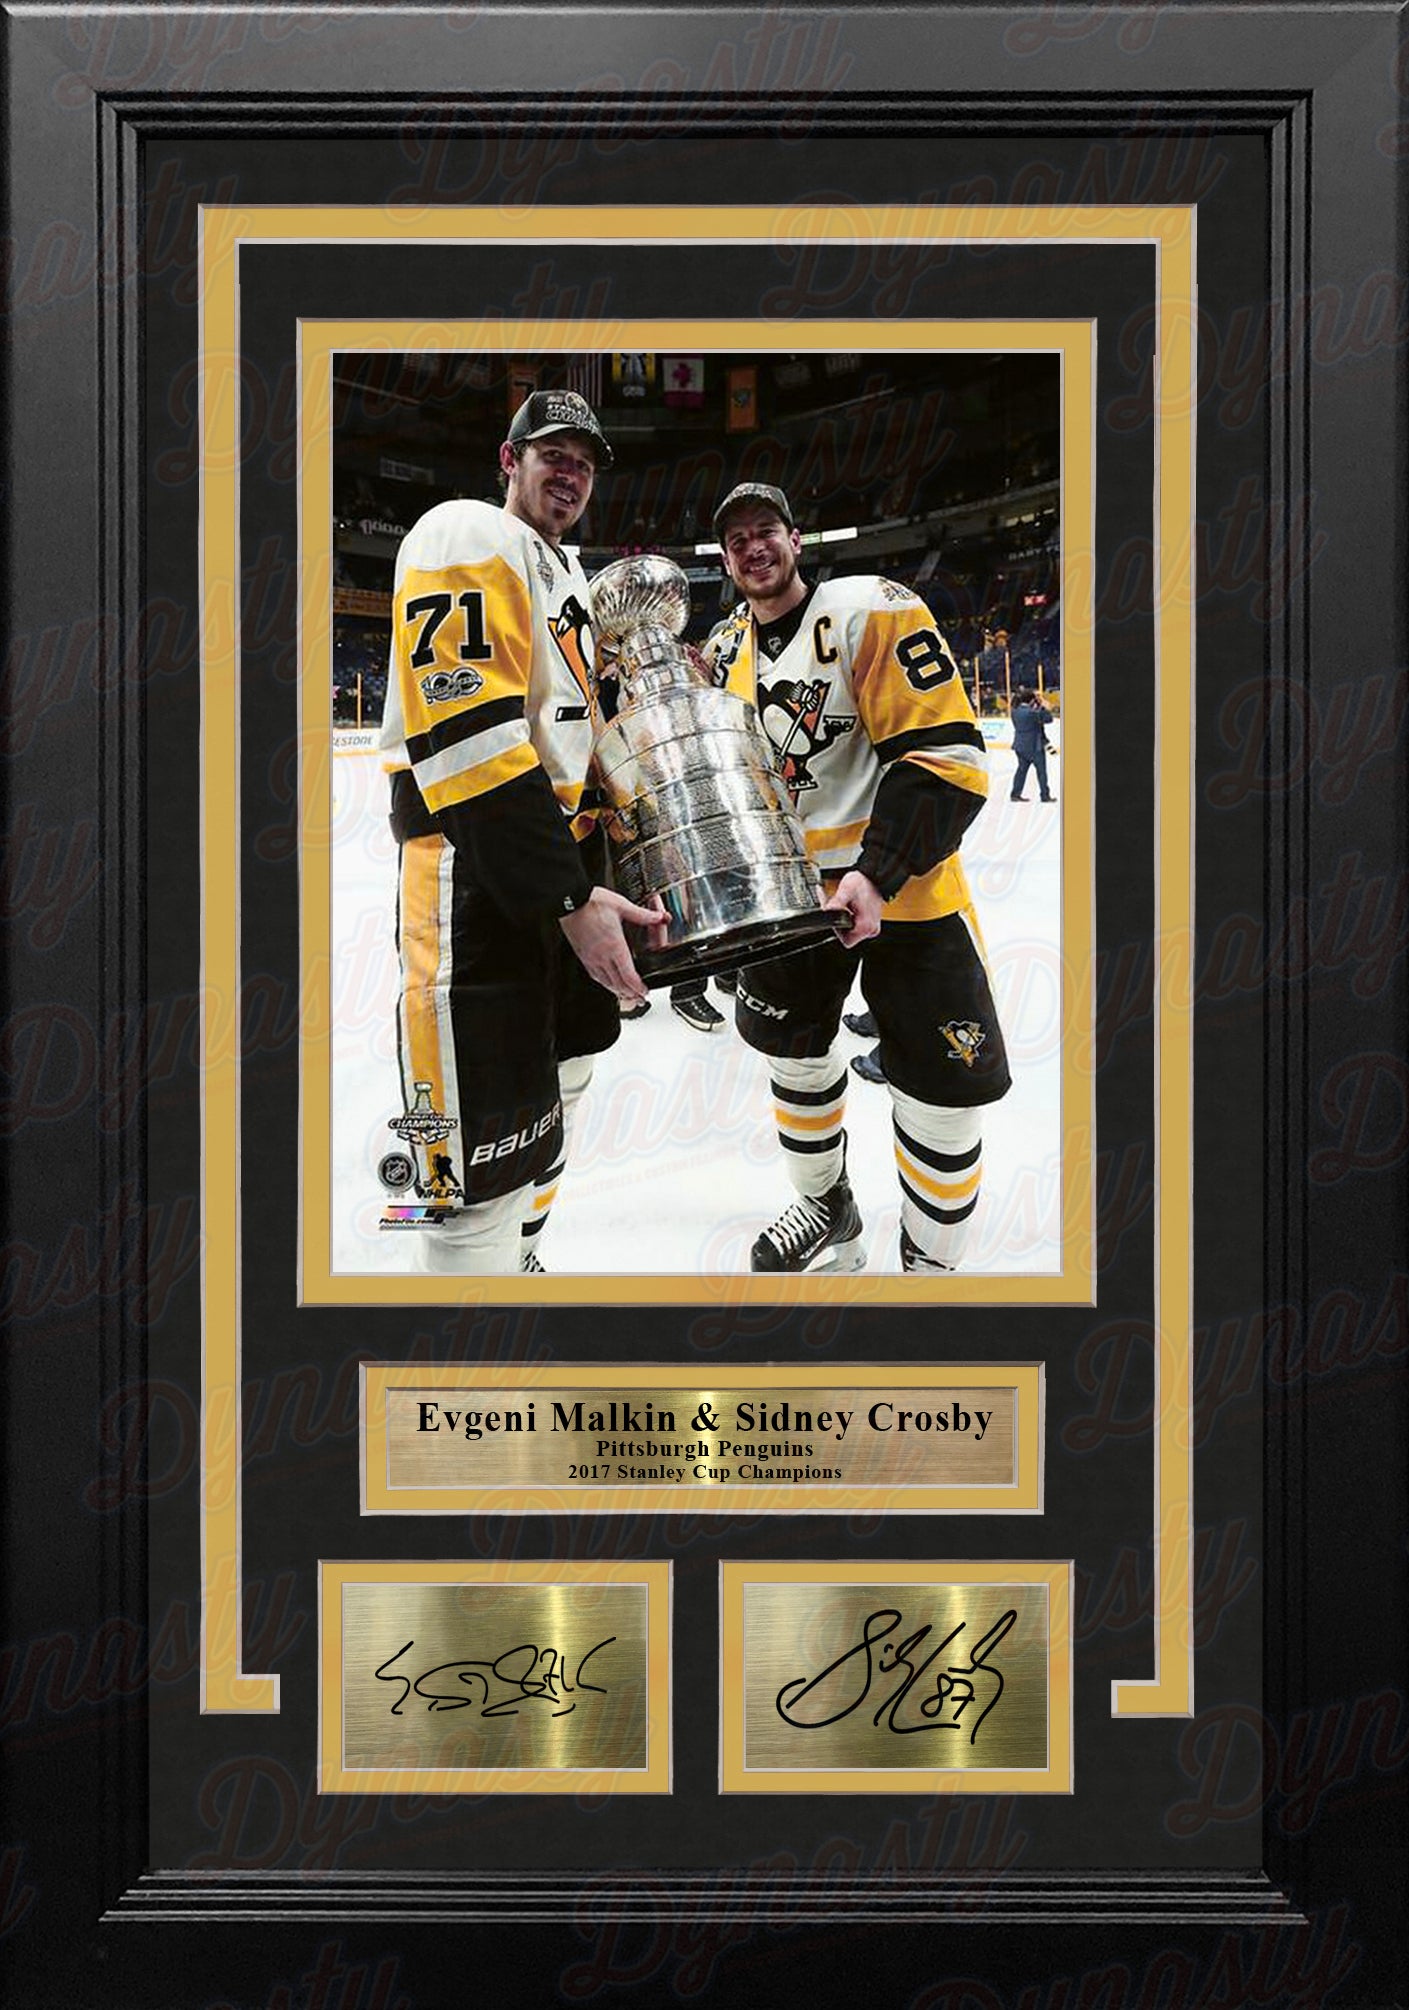 Sidney Crosby of the Pittsburgh Penguins signed